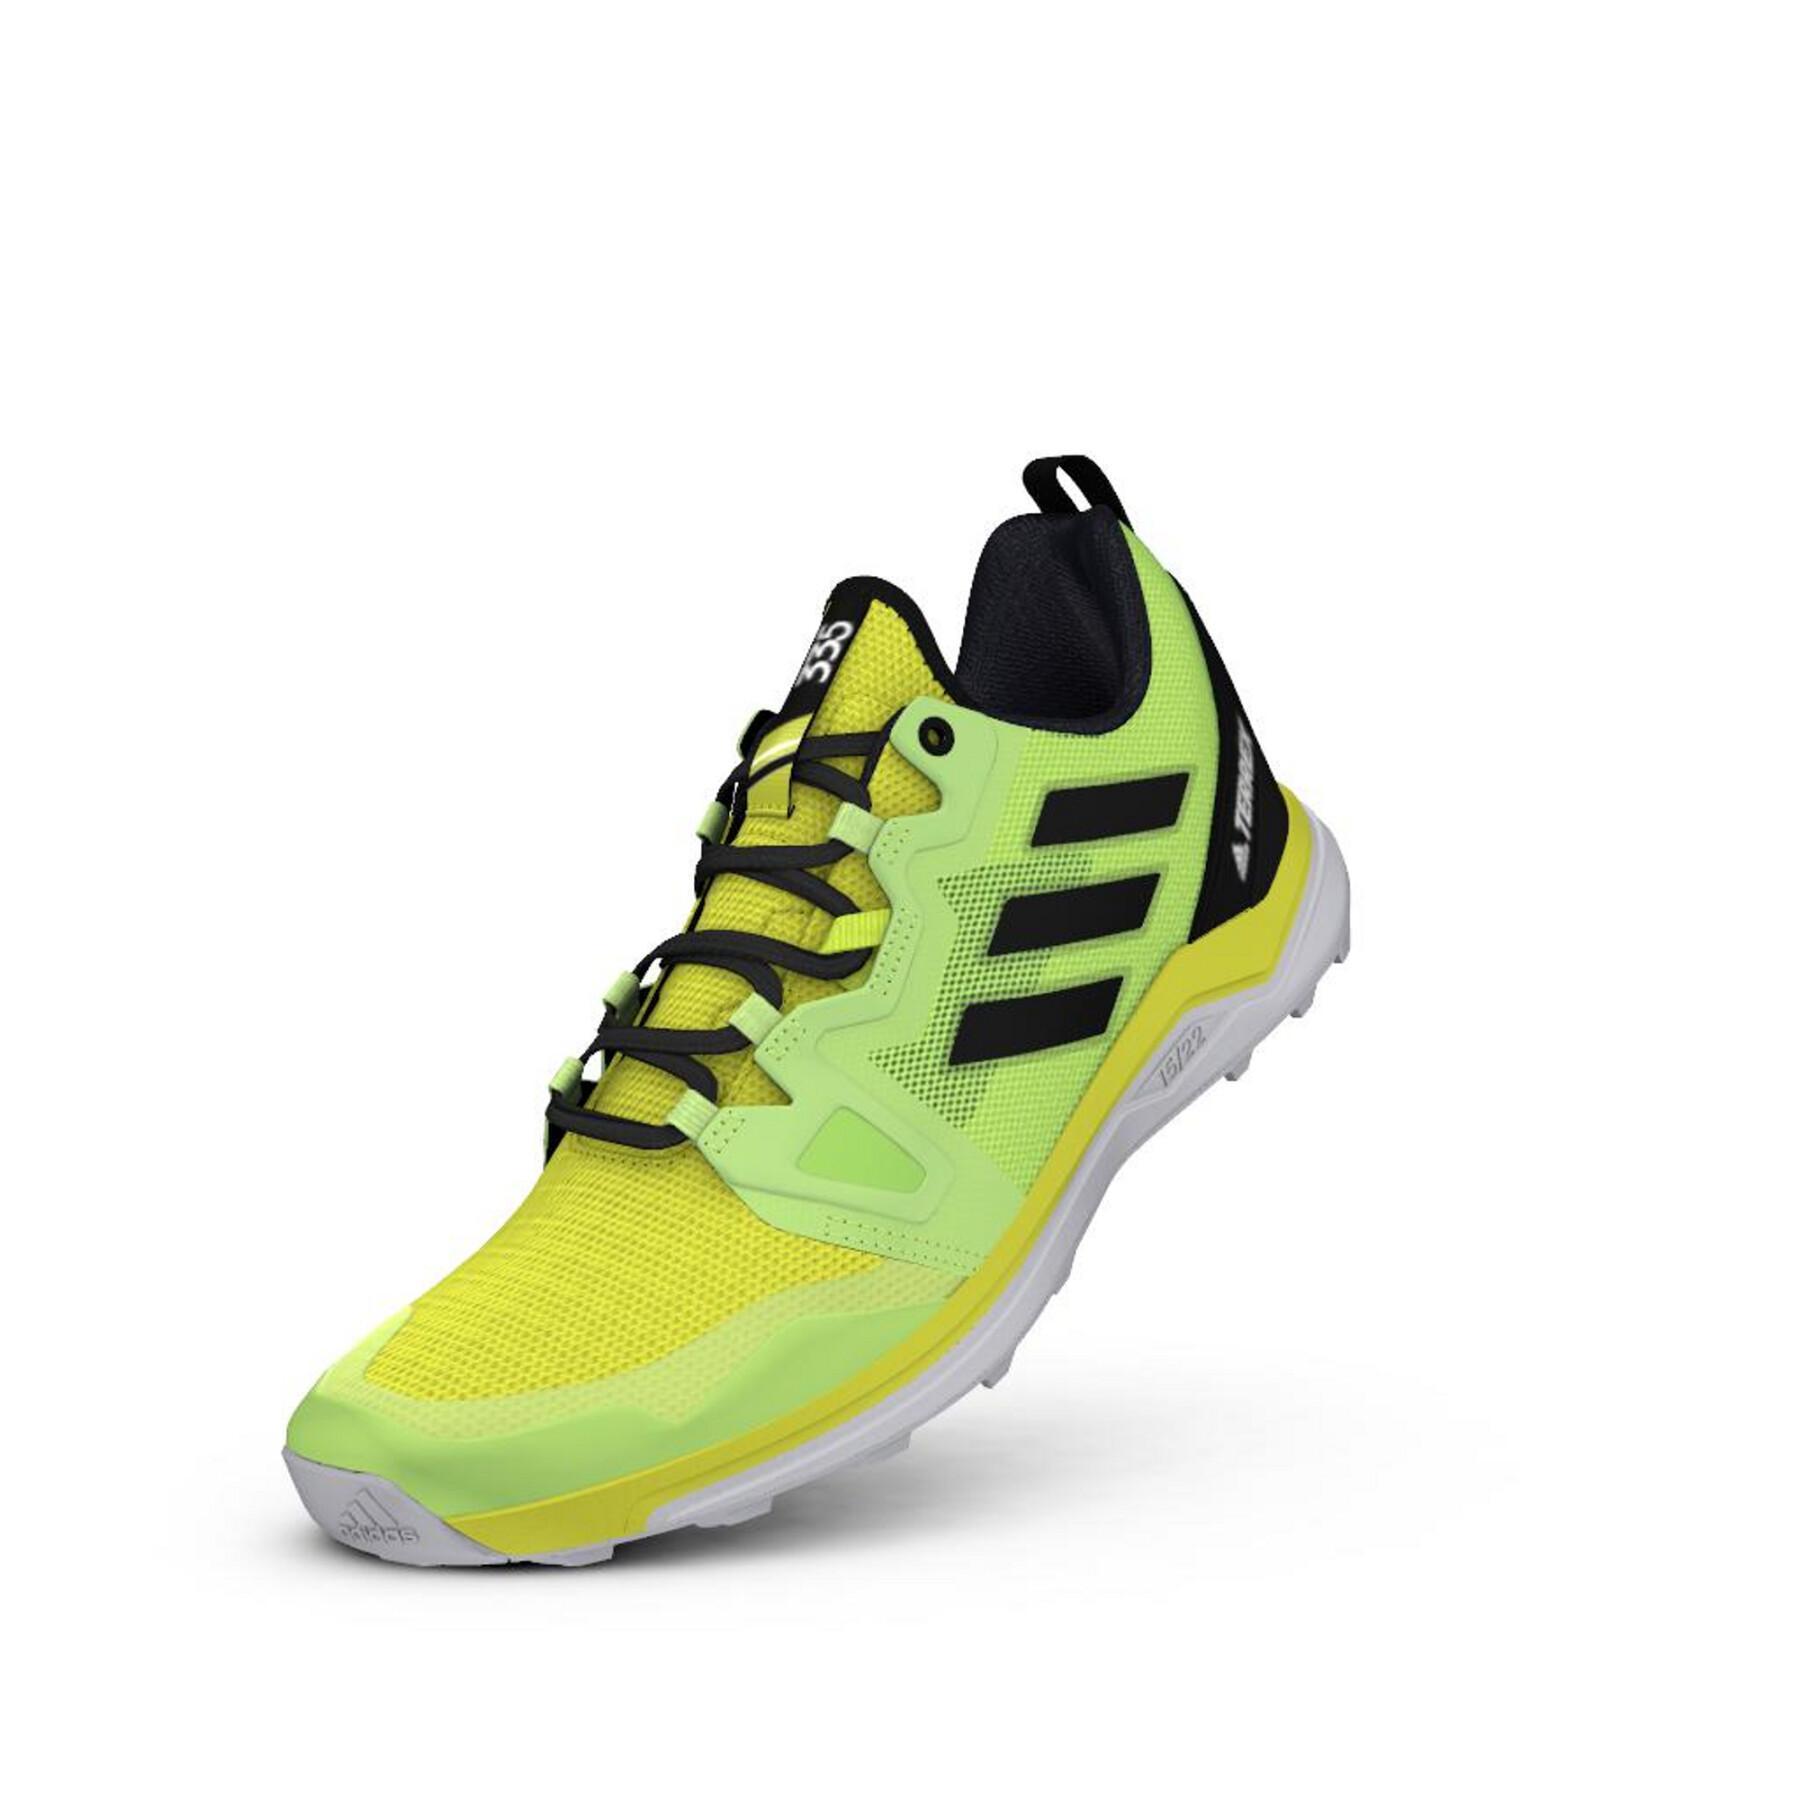 Trail shoes adidas Running Terrex Agravic